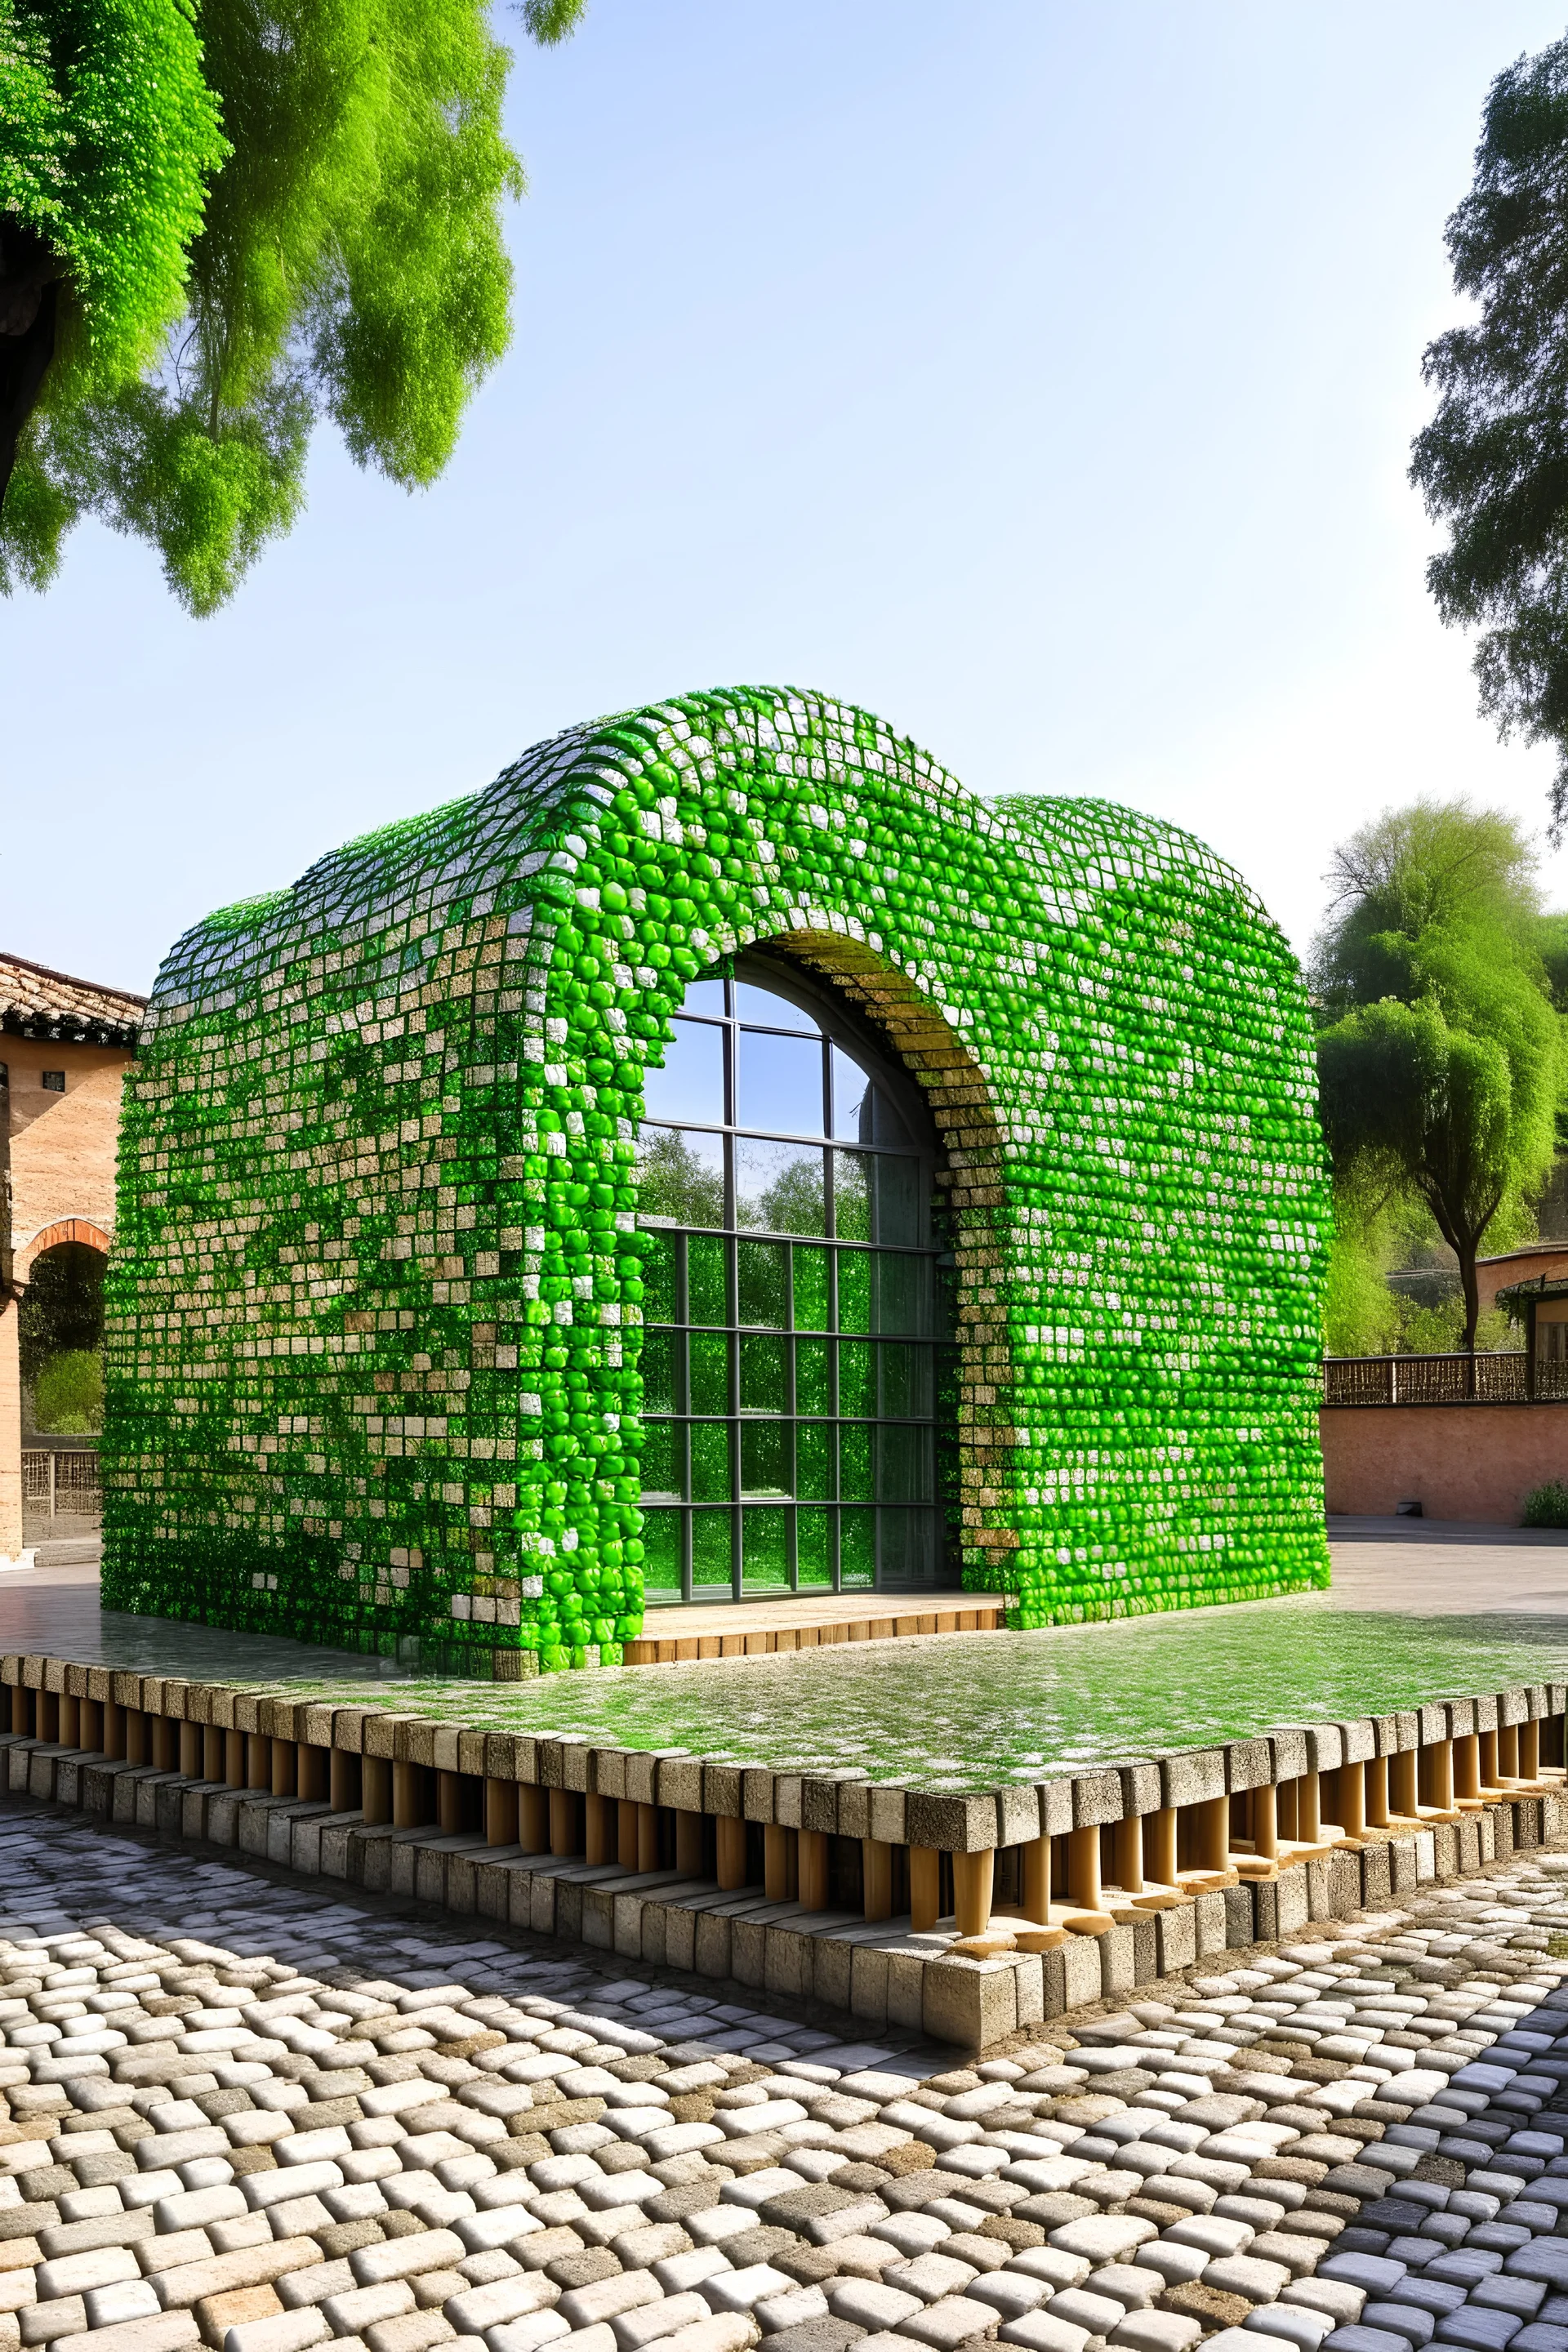 Pavilion made of recycled materials like recycled glass and recycled wood, at a historical site in Mexico, that hosts temporary exhibitions of local and national artists, promoting the art and culture of the region of Puebla. The design needs to be curvilinear and organic